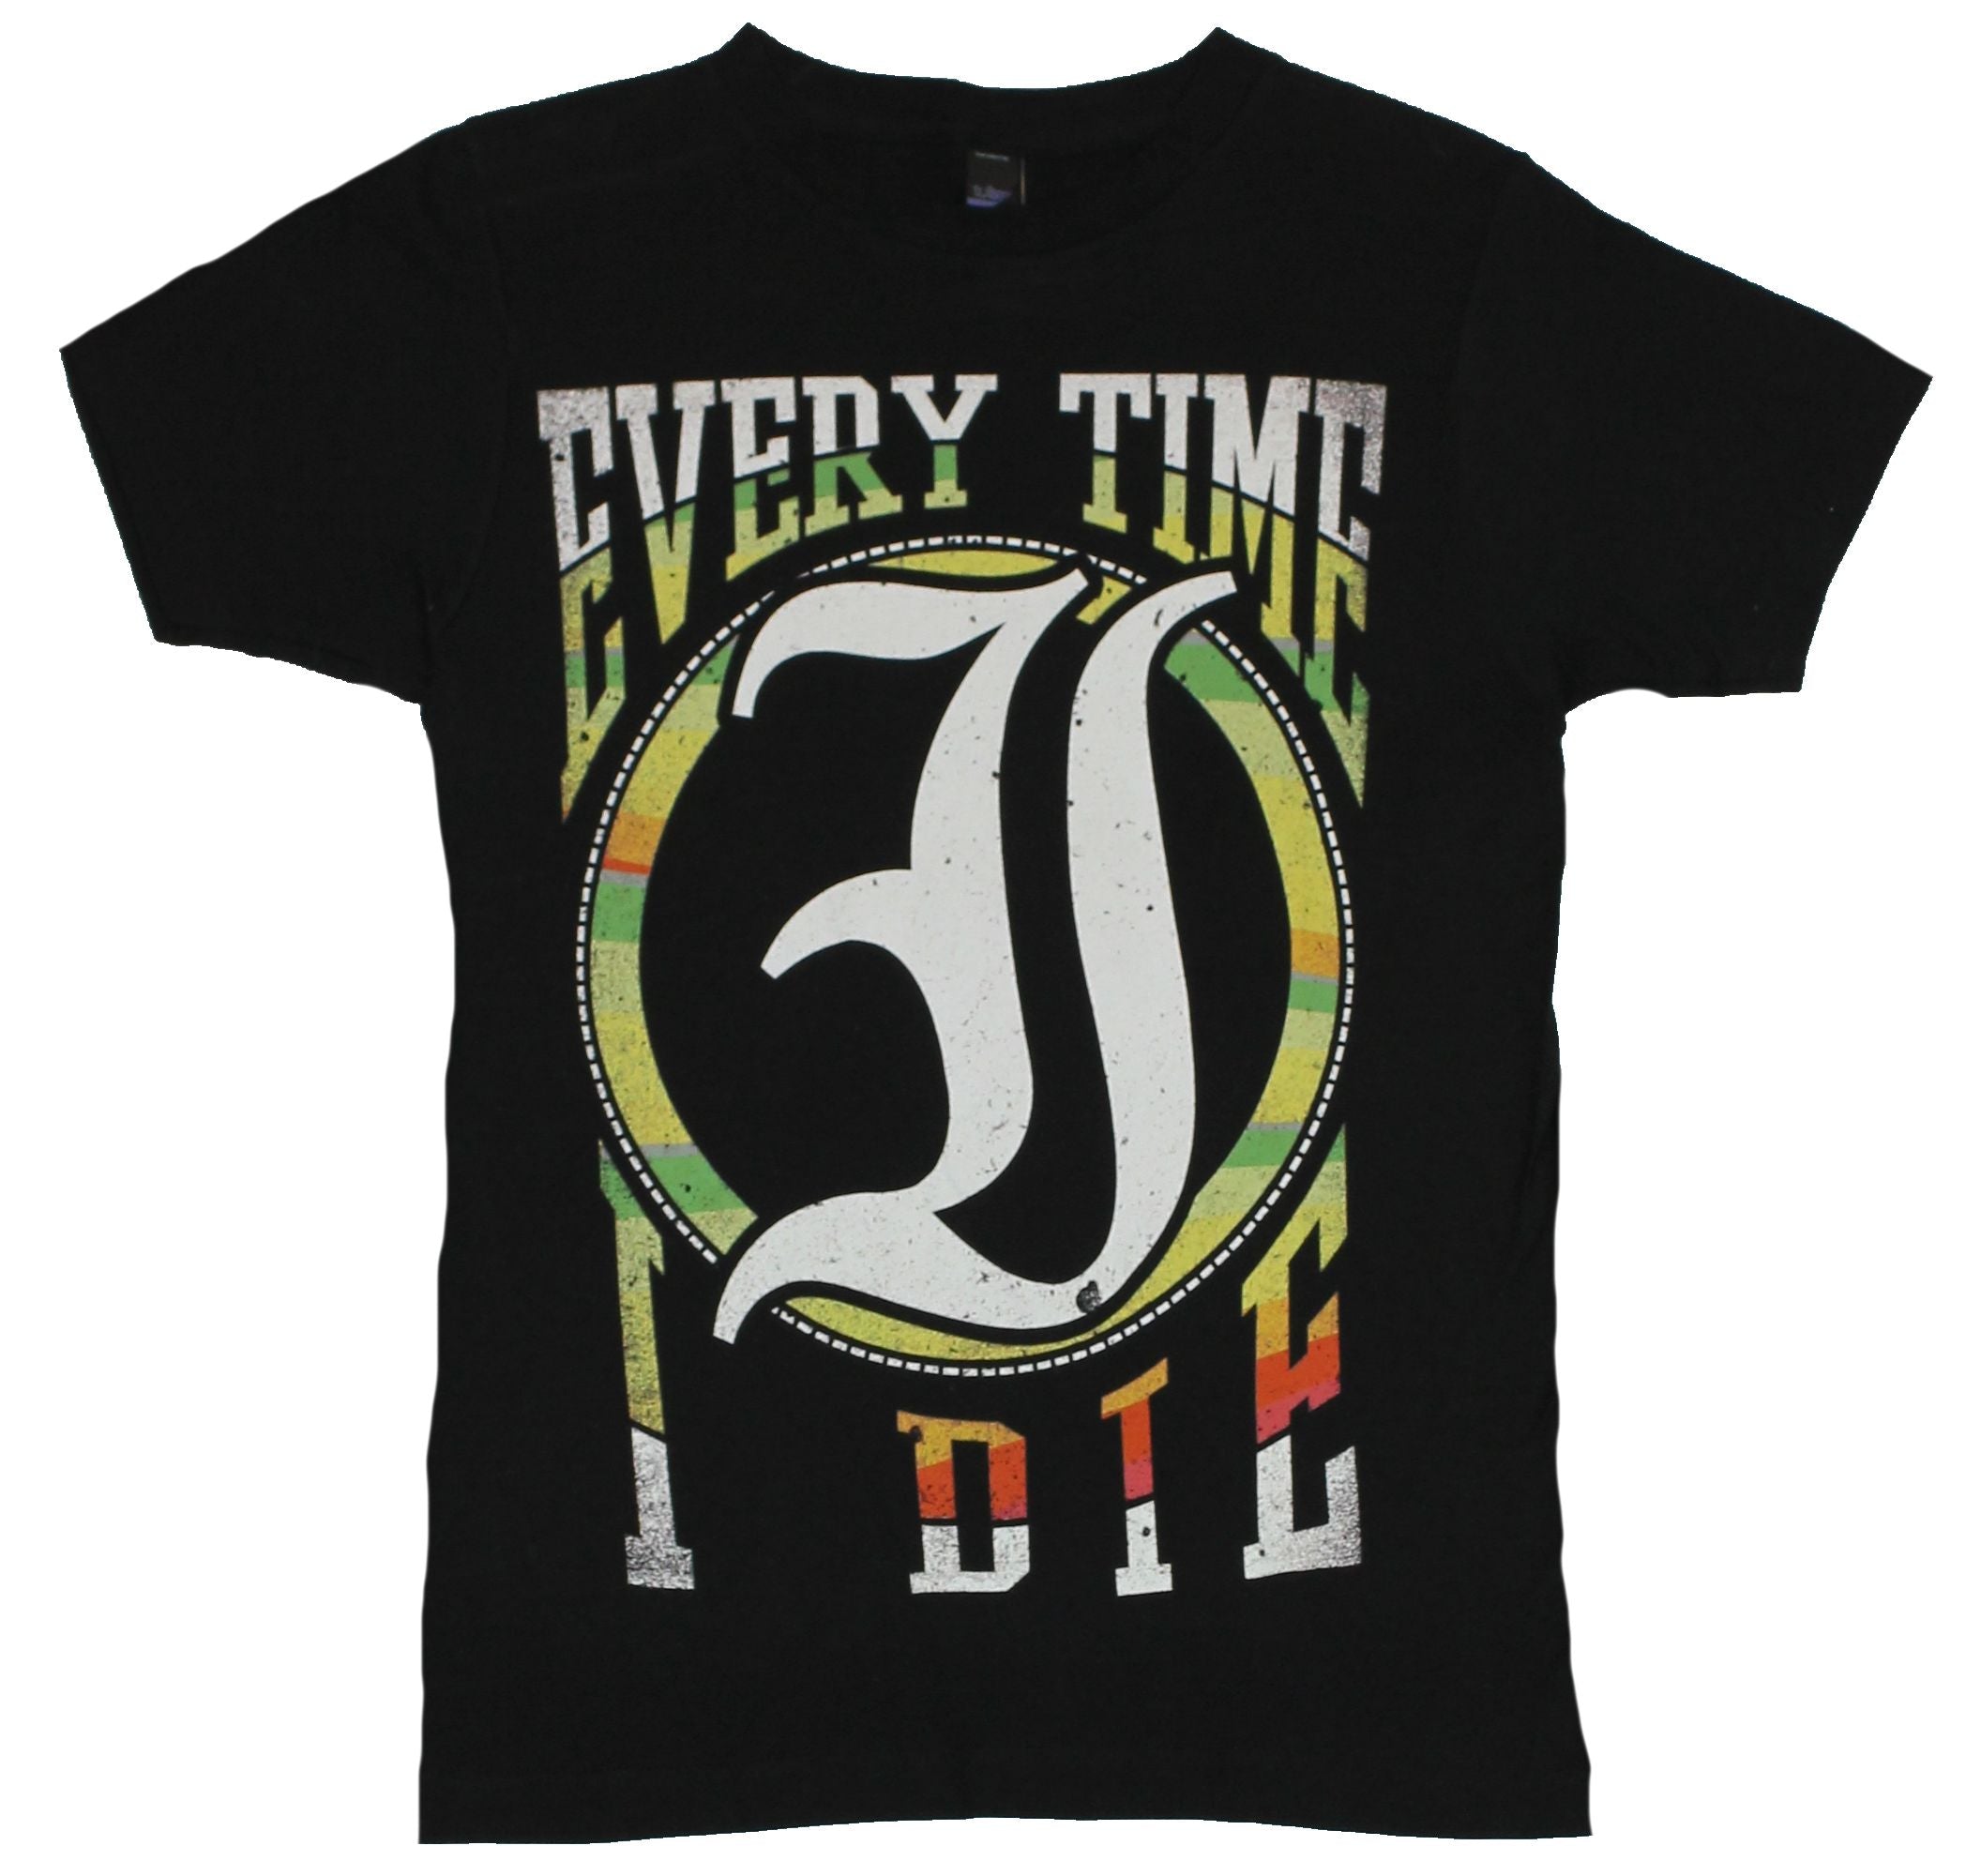 Every time I Die Mens T-Shirt - Giant Circled Distressed and Colored Logo Image